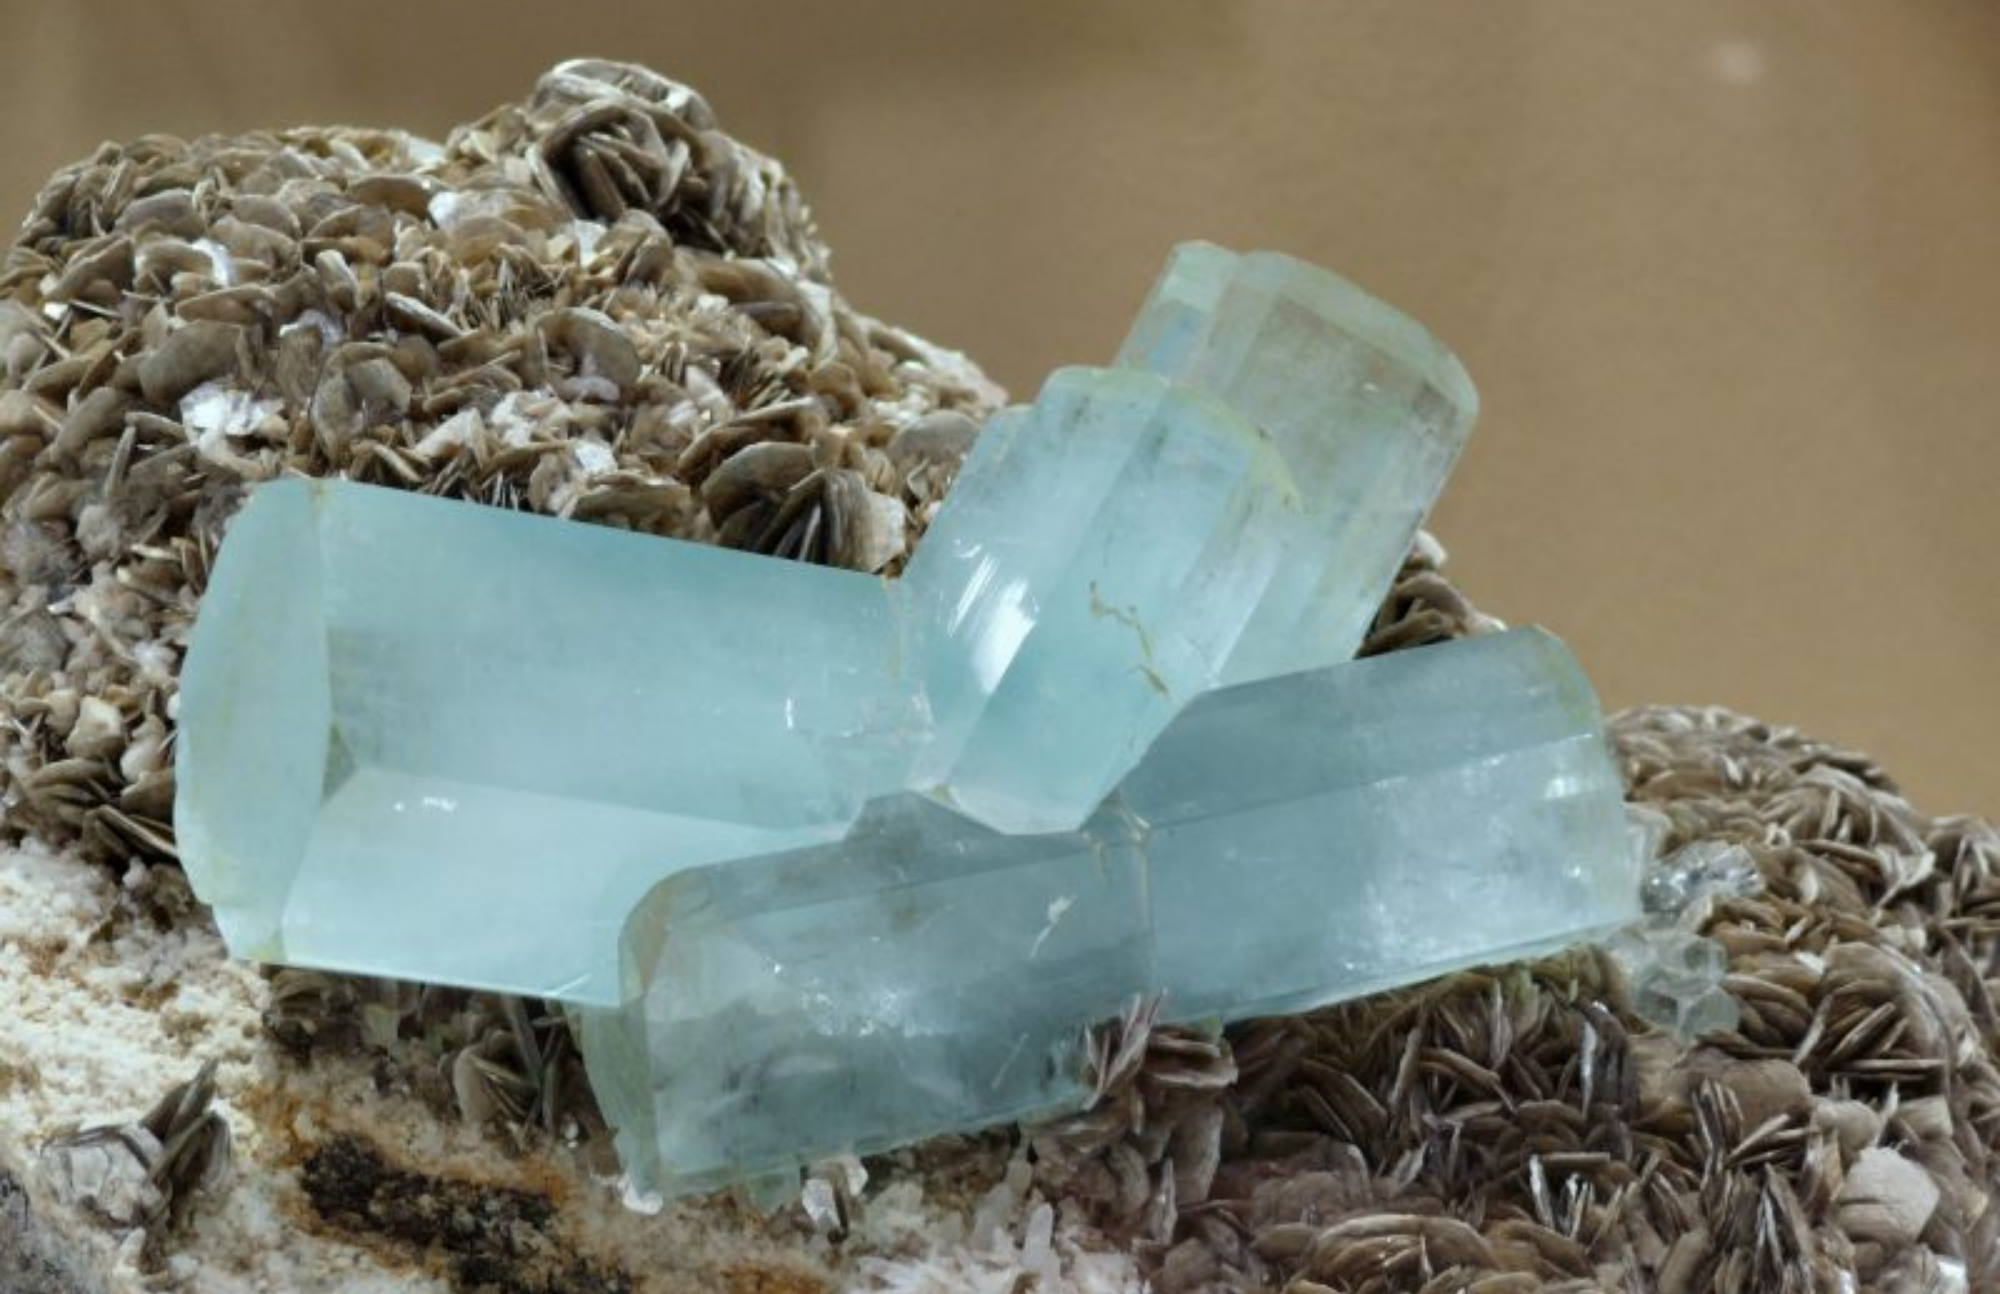 Birthstone For March - Aquamarine's Strange Properties And Meaning